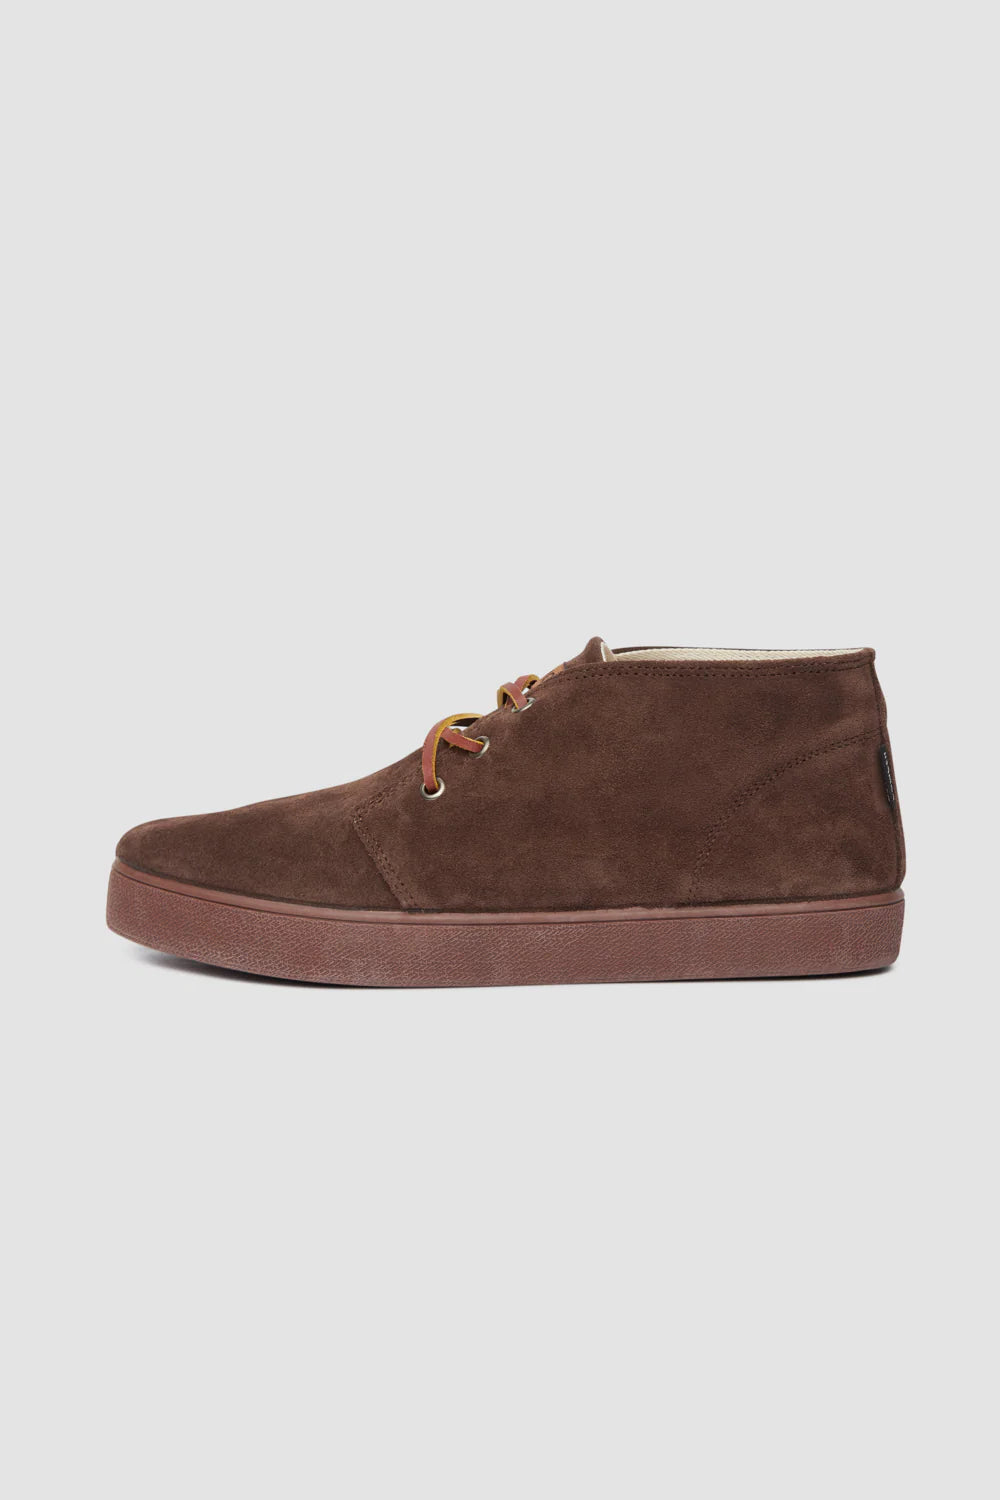 CATALINA SUEDE HYDRO BROWN MINK